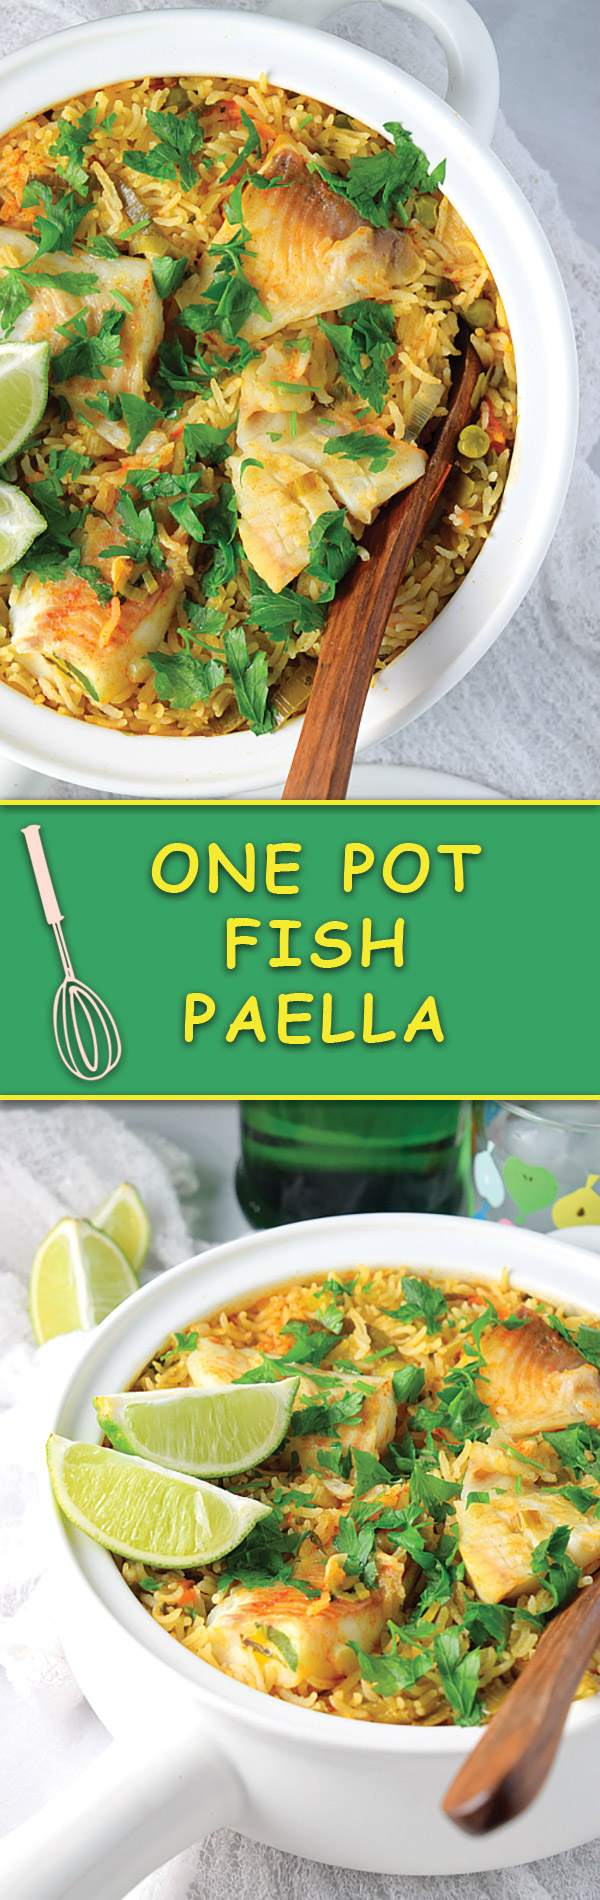 One Pot Fish Paella - a simple light ONE POT meal that takes just few minutes to assemble and is one of our most popular pin of all time! Try for yourself.